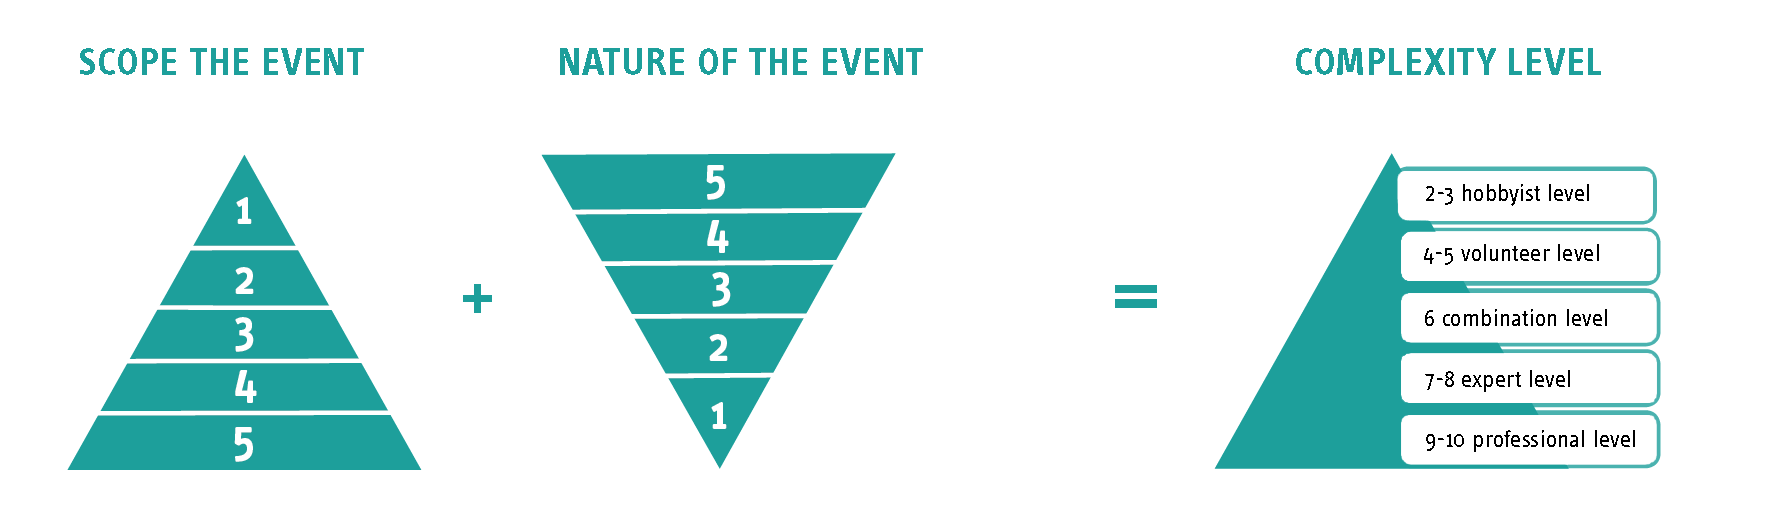 Scope of the event, nature of the event and complexity level